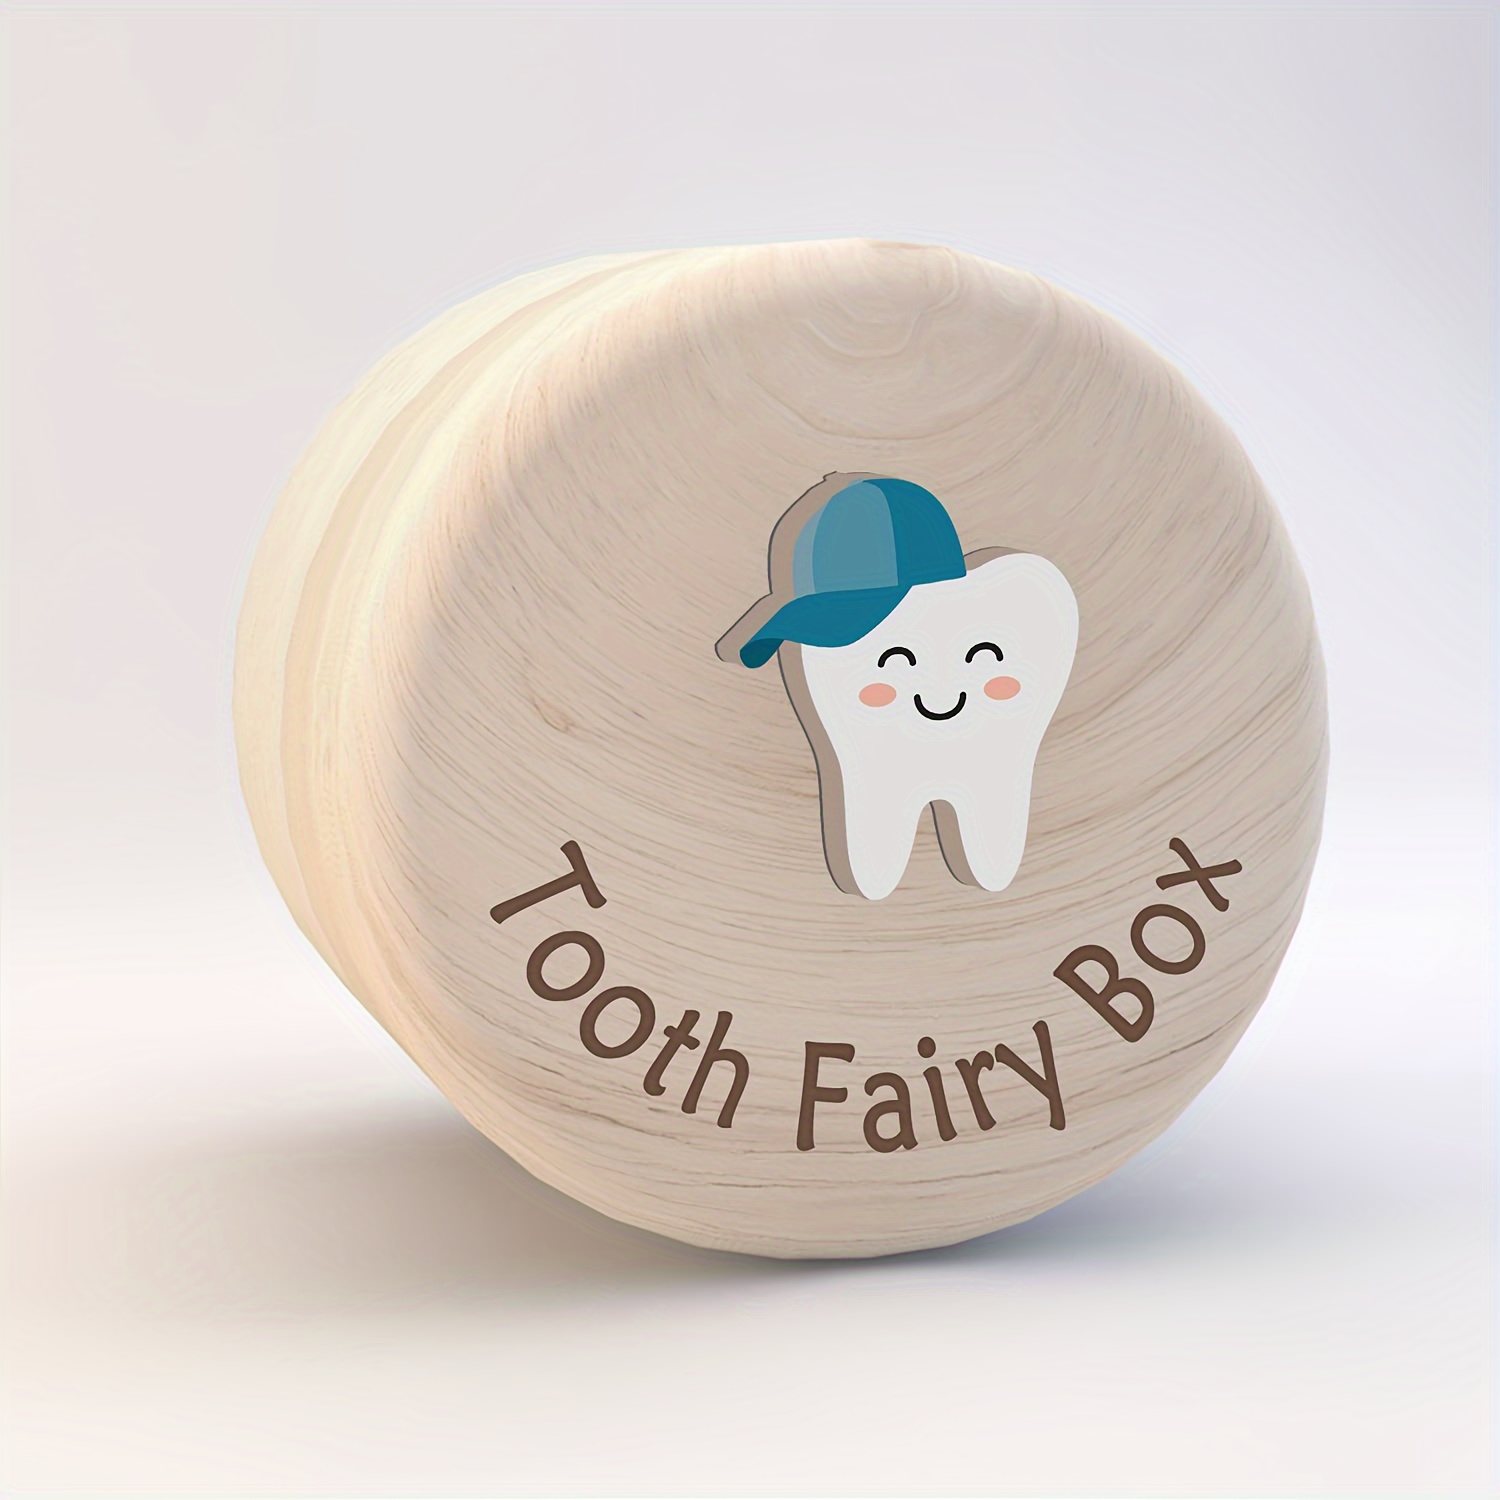 

Wooden Box With Cute 3d Tooth Fairy Design, For Storing Lost Teeth, Keepsake Box For Fallen Teeth, A Gift For Room Decor